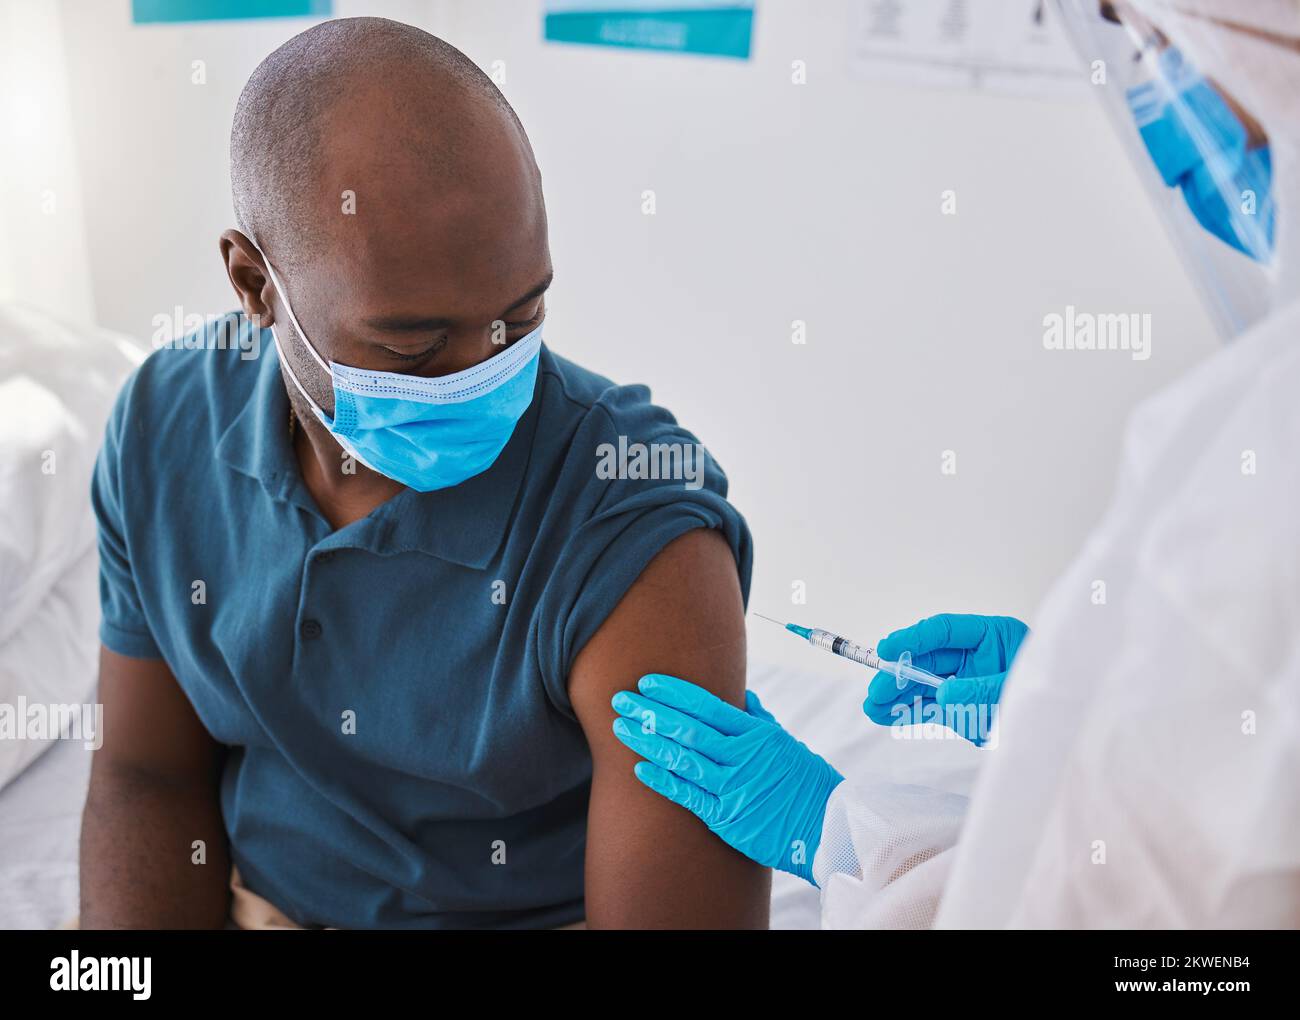 Vaccine, injection and virus cure for covid, disease and pandemic illness from doctor, healthcare or medical professional. Male patient with mask Stock Photo